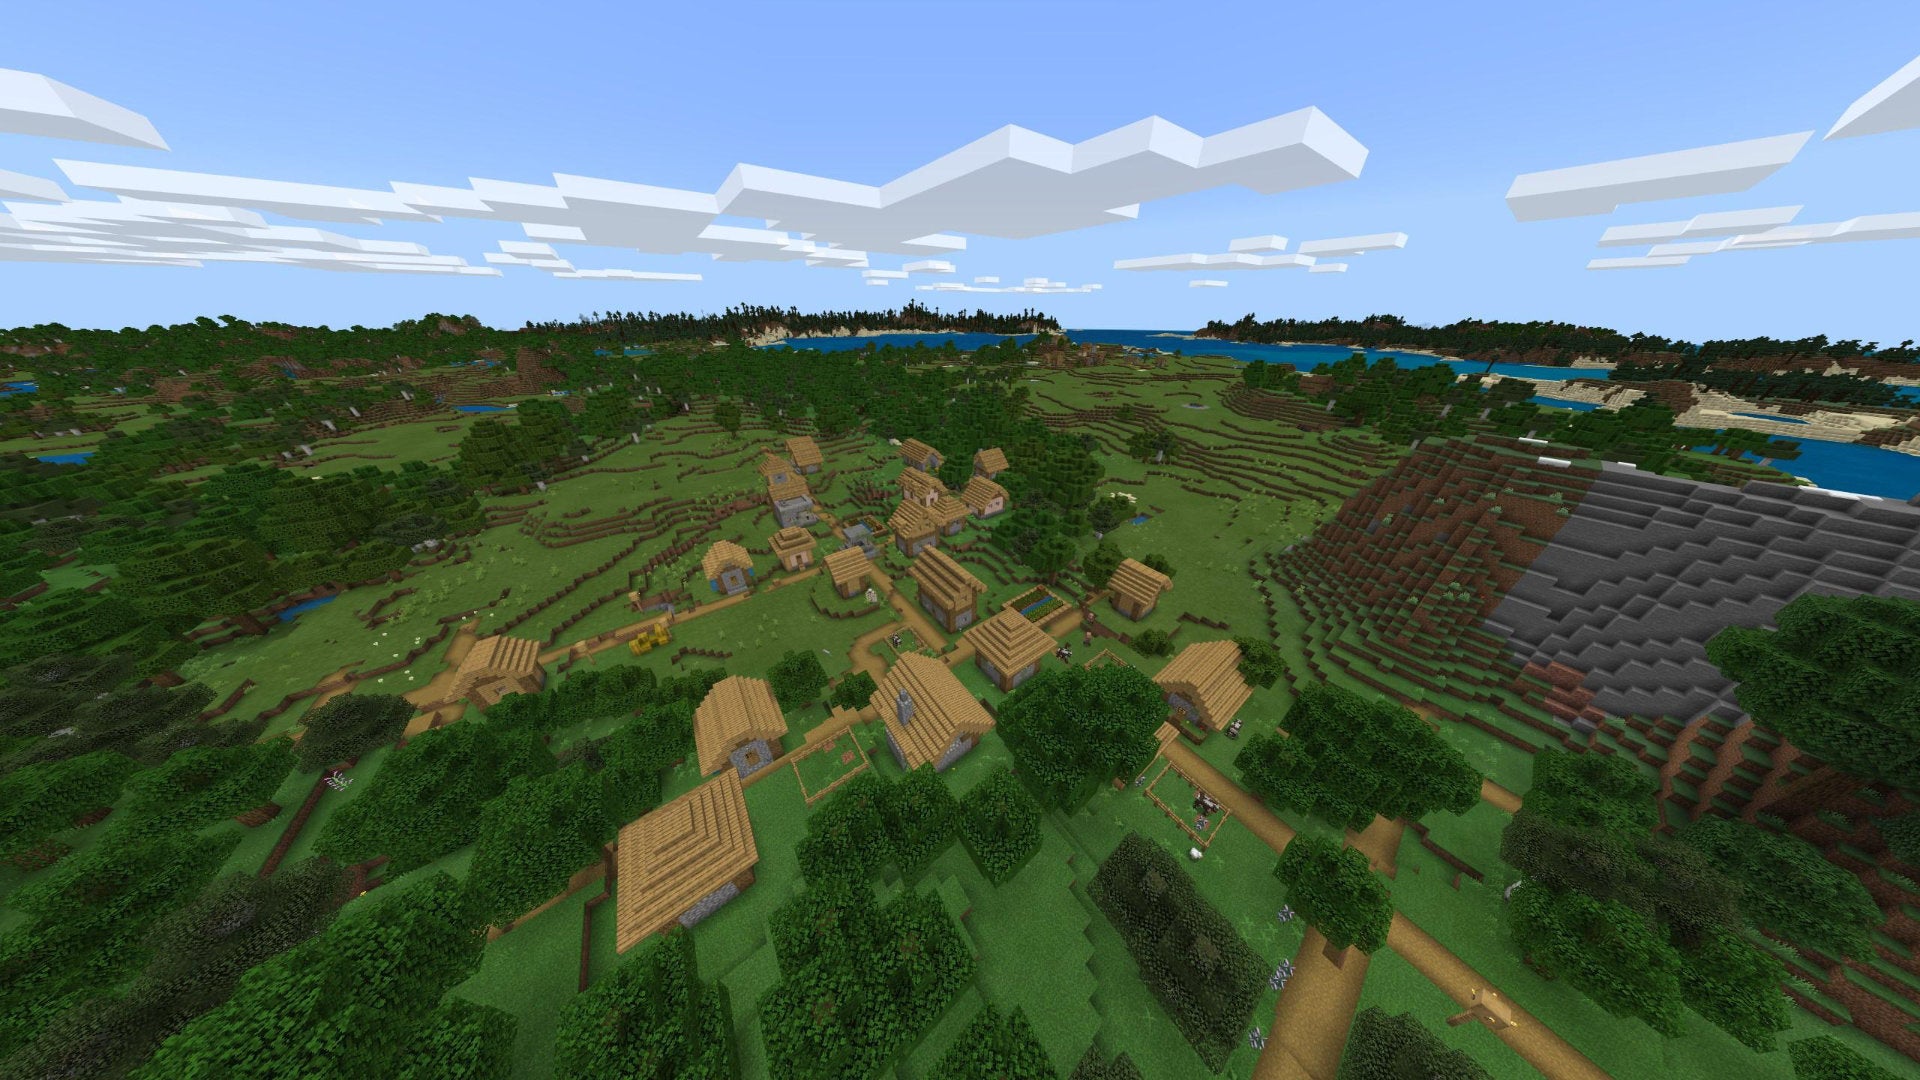 A Minecraft Bedrock screenshot of a new world created with the seed 2034376196.